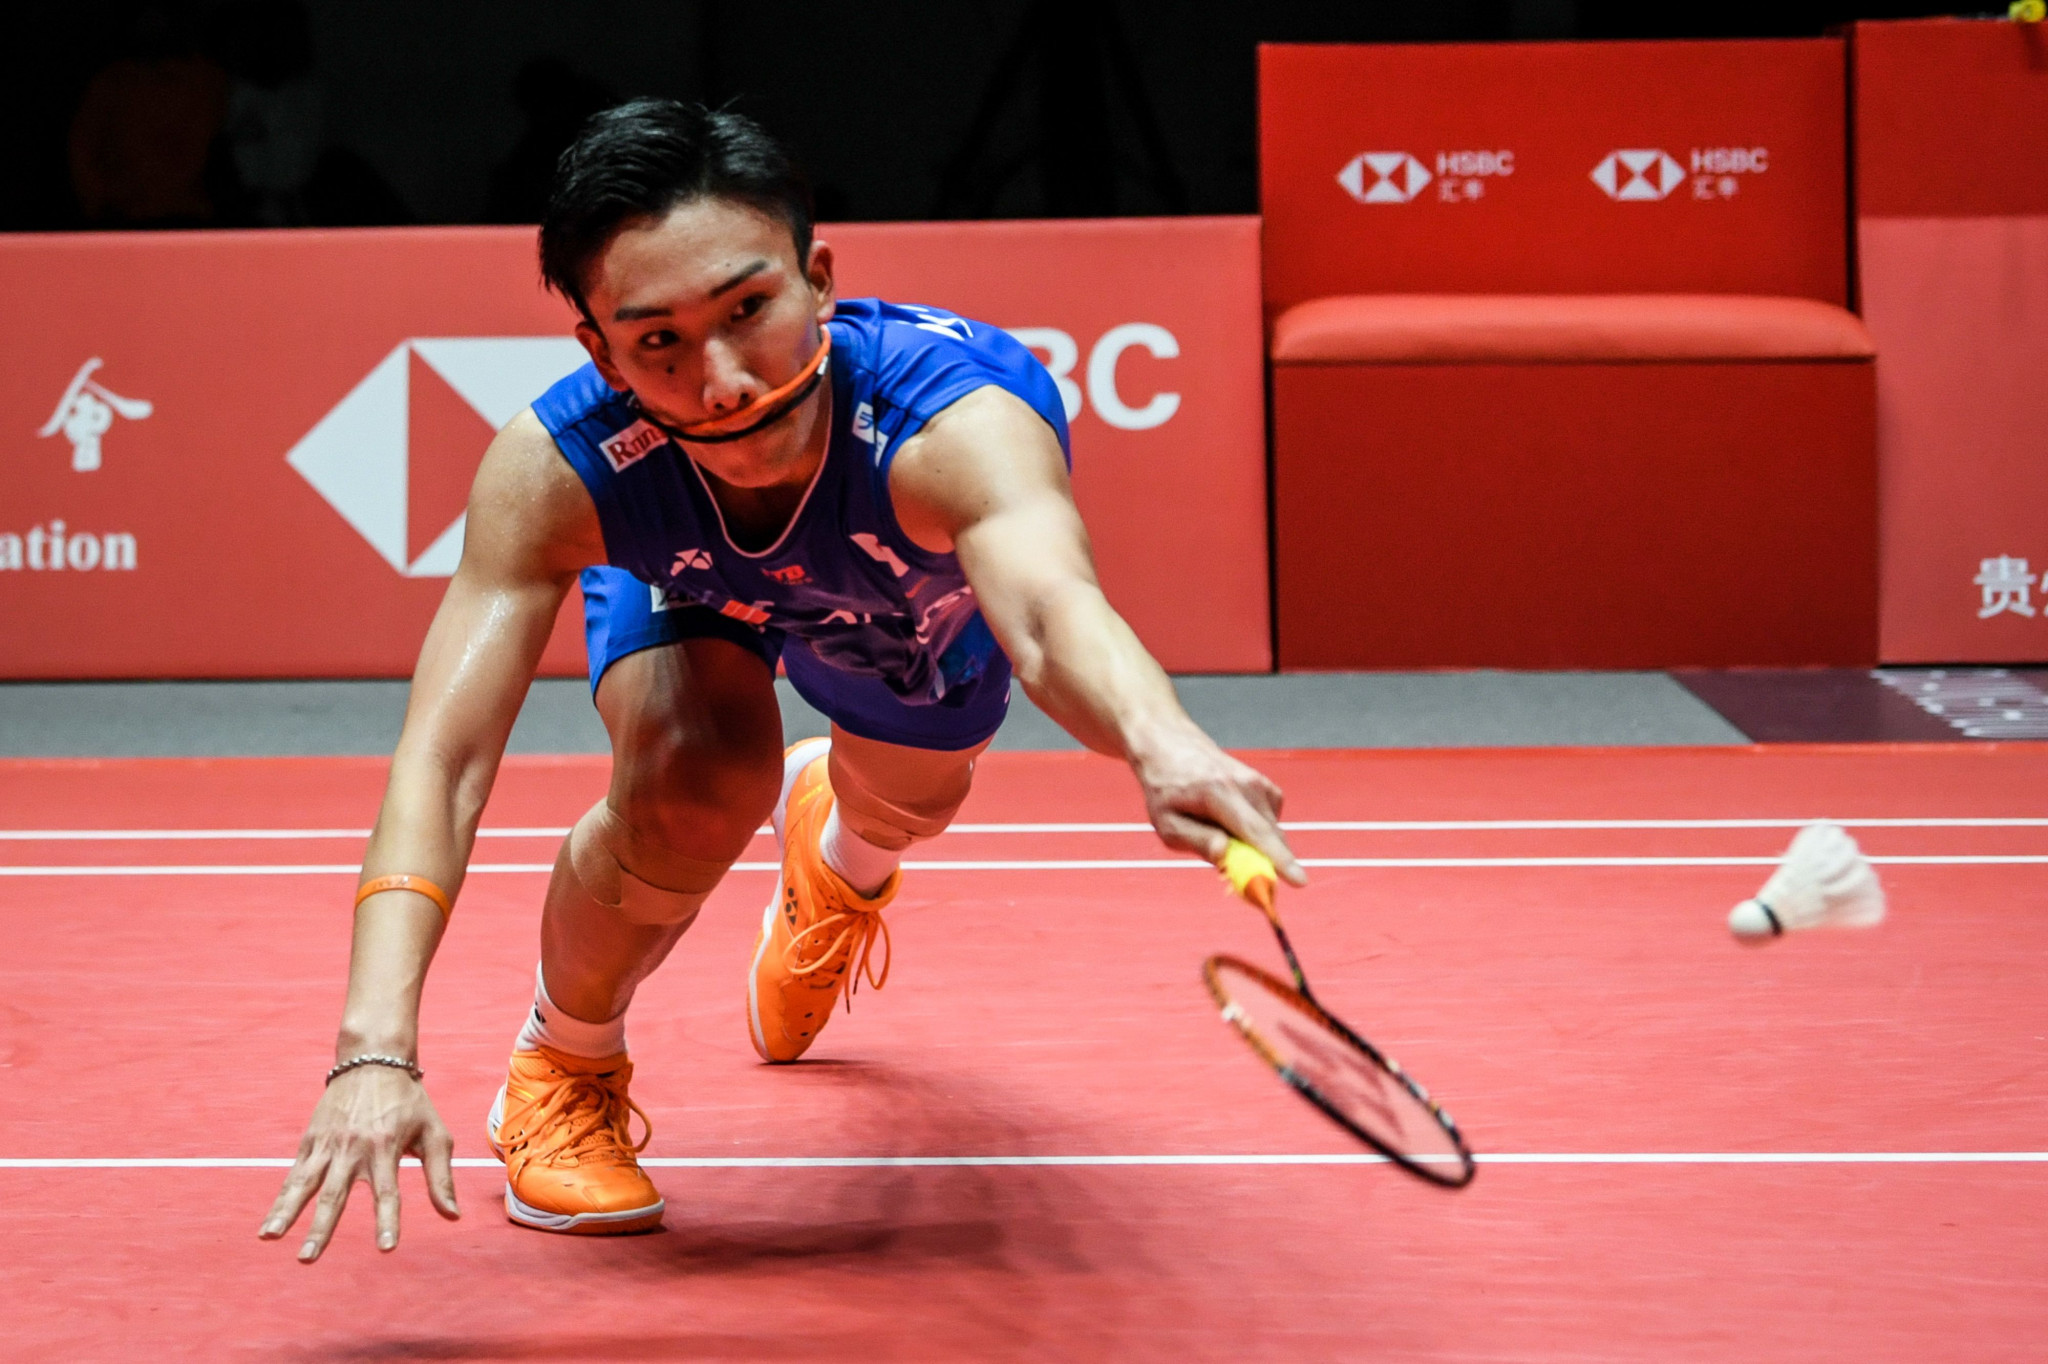 Top seed Kento Momota of Japan has moved a step closer to claiming the men’s singles title at the All England Badminton Championships in Birmingham ©Getty Images